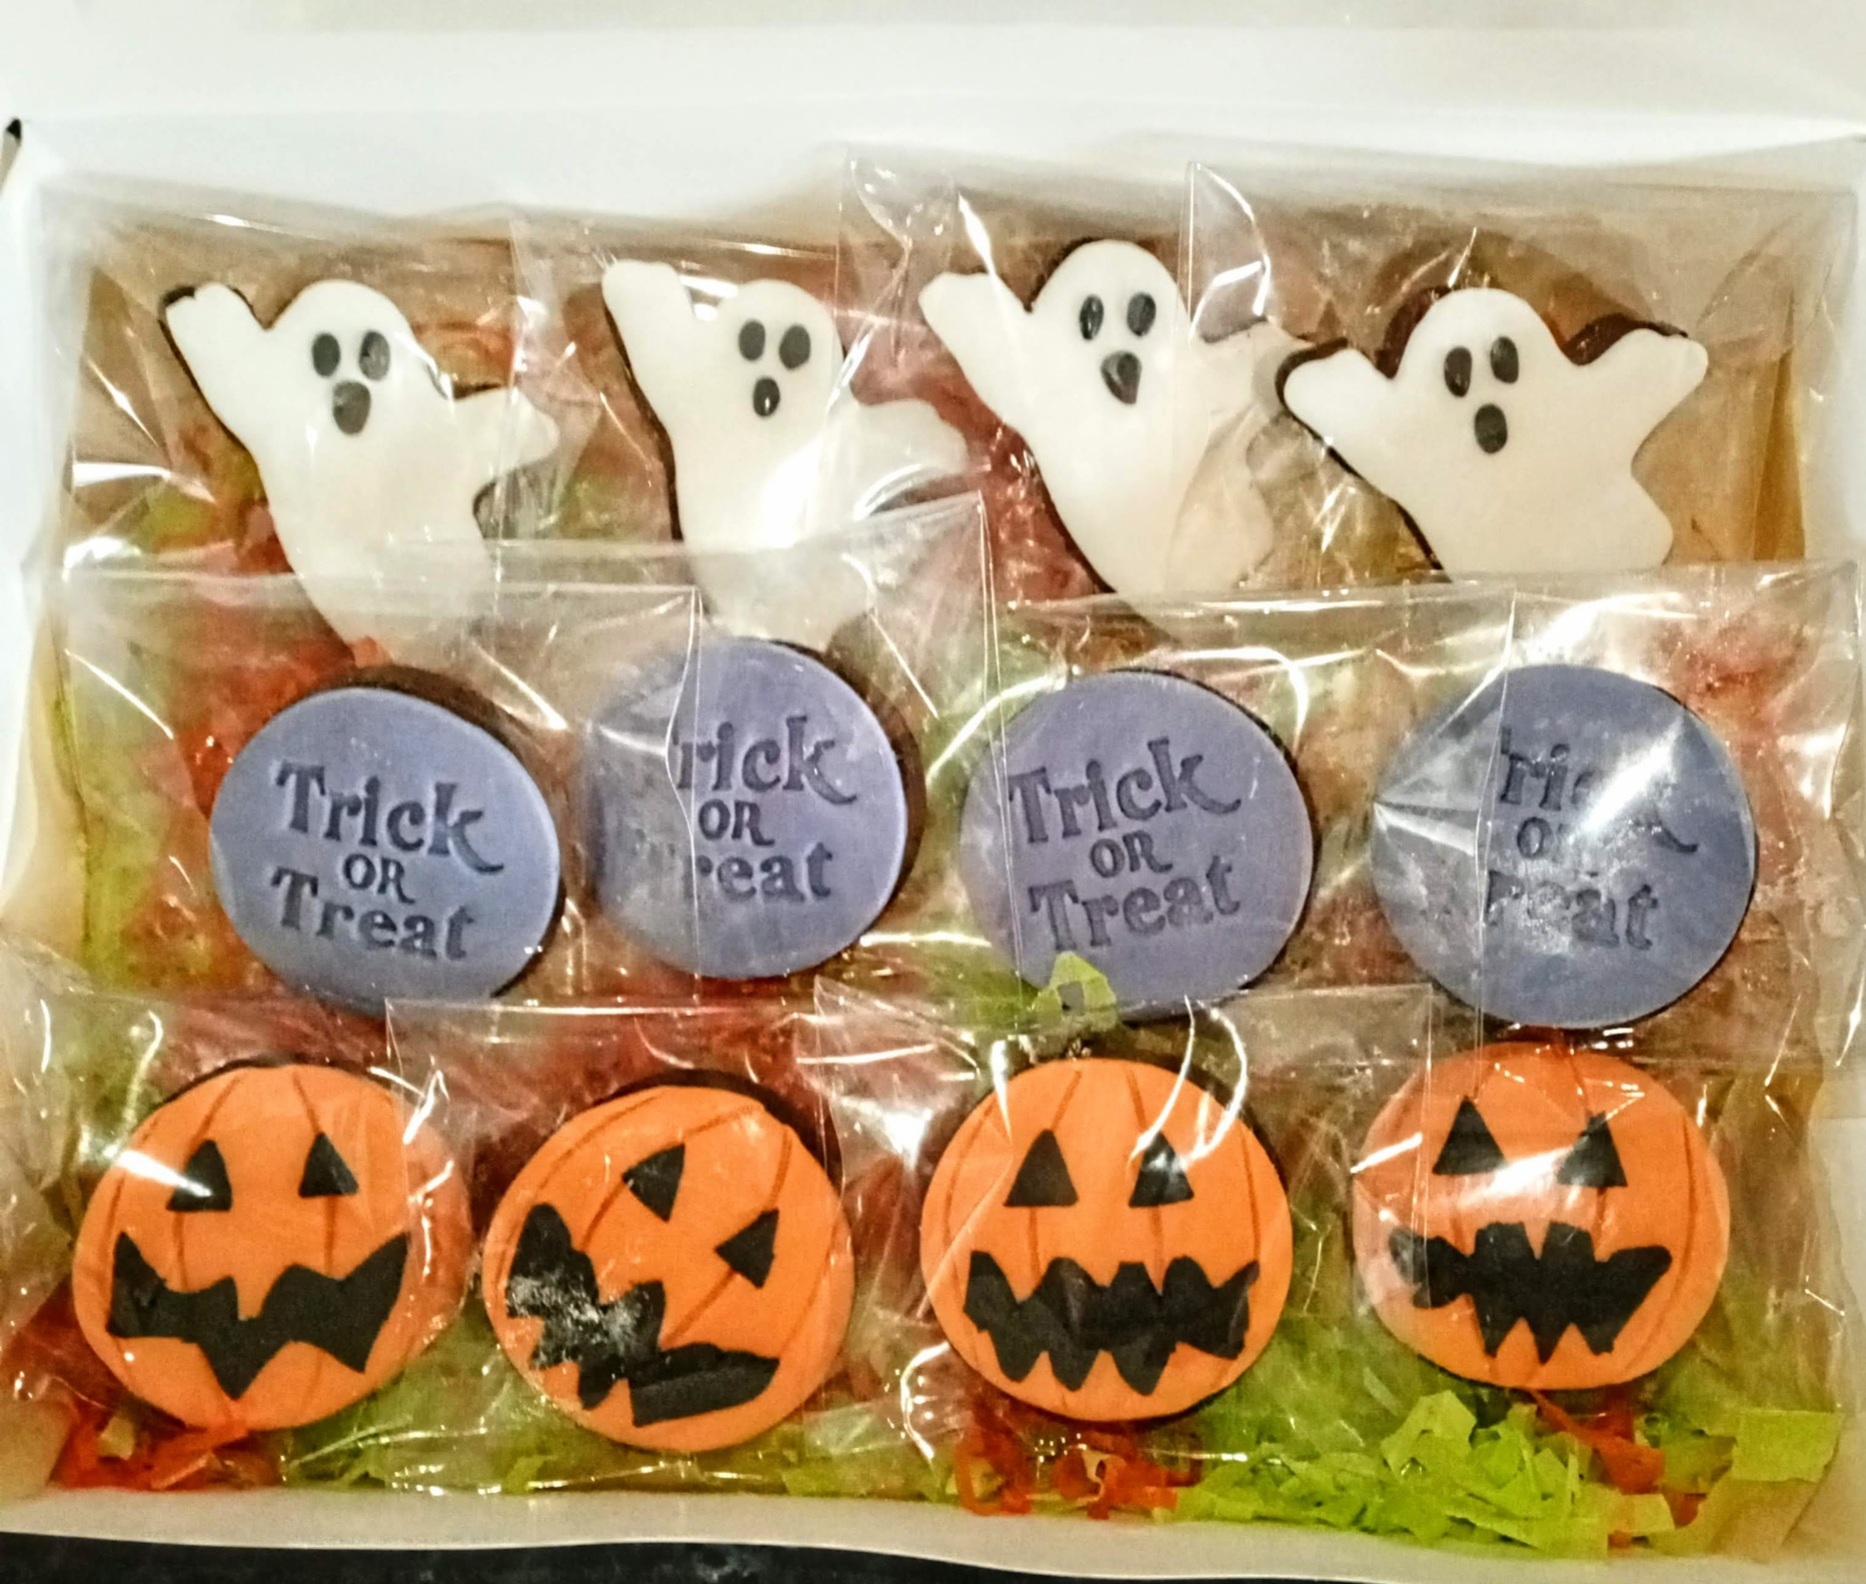 Trick or treat, ghost and pumpkin cookie